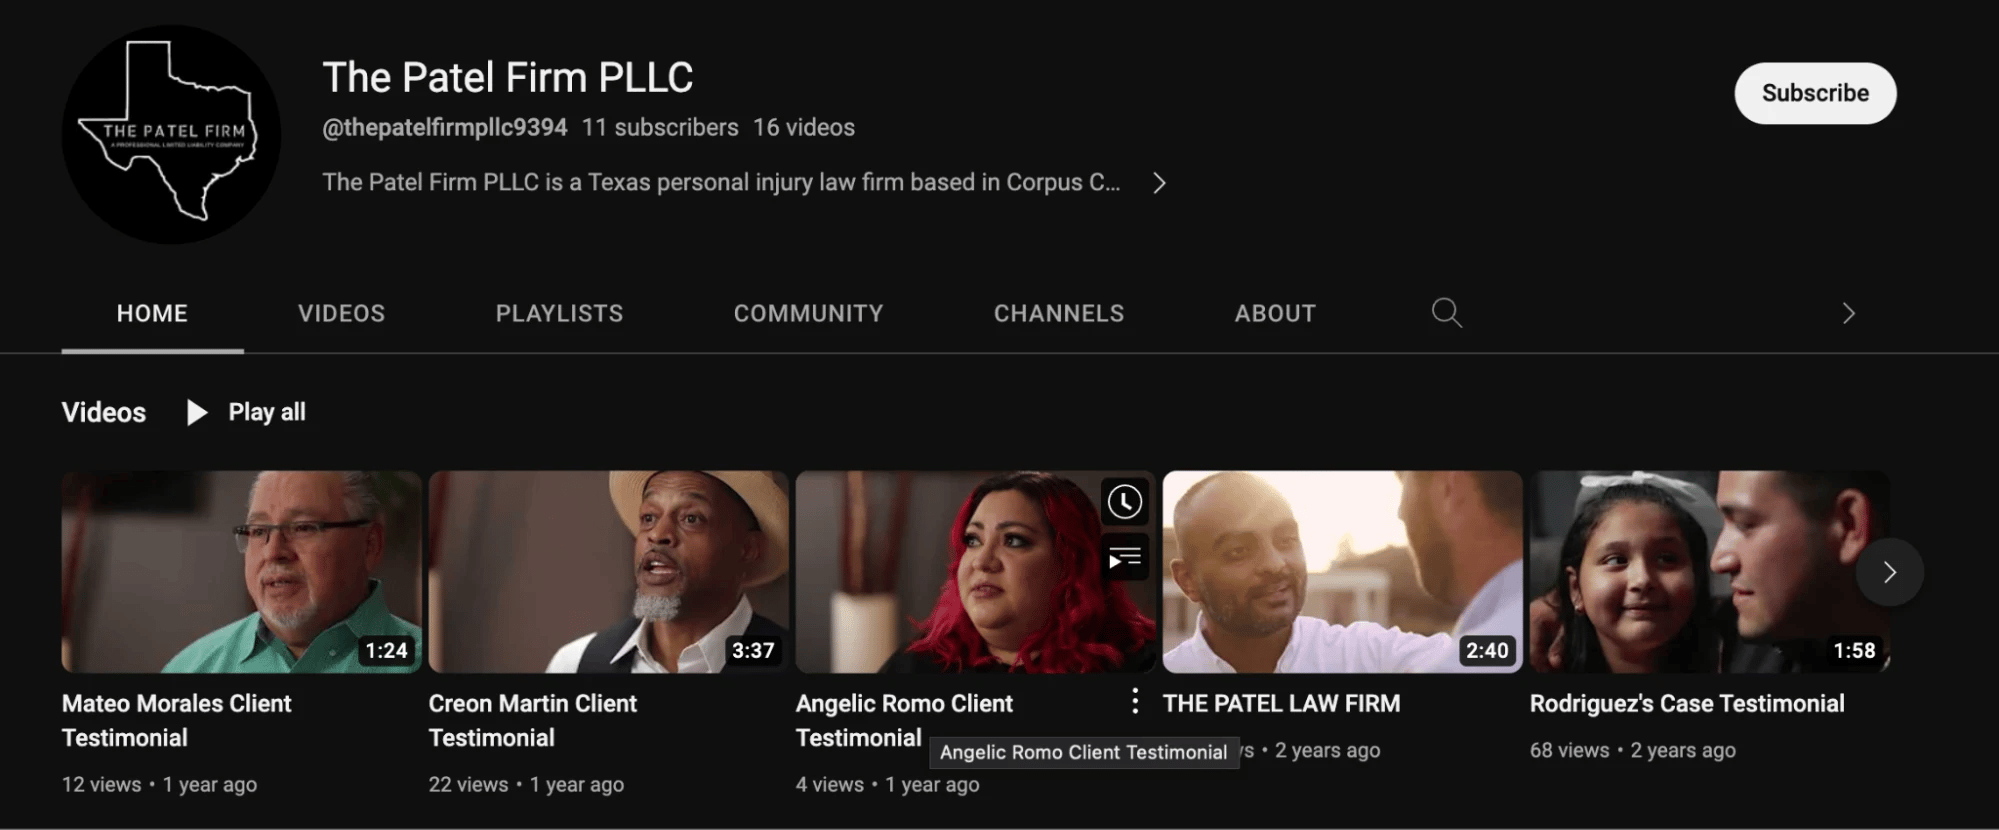 The Patel Firm PLLC YouTube